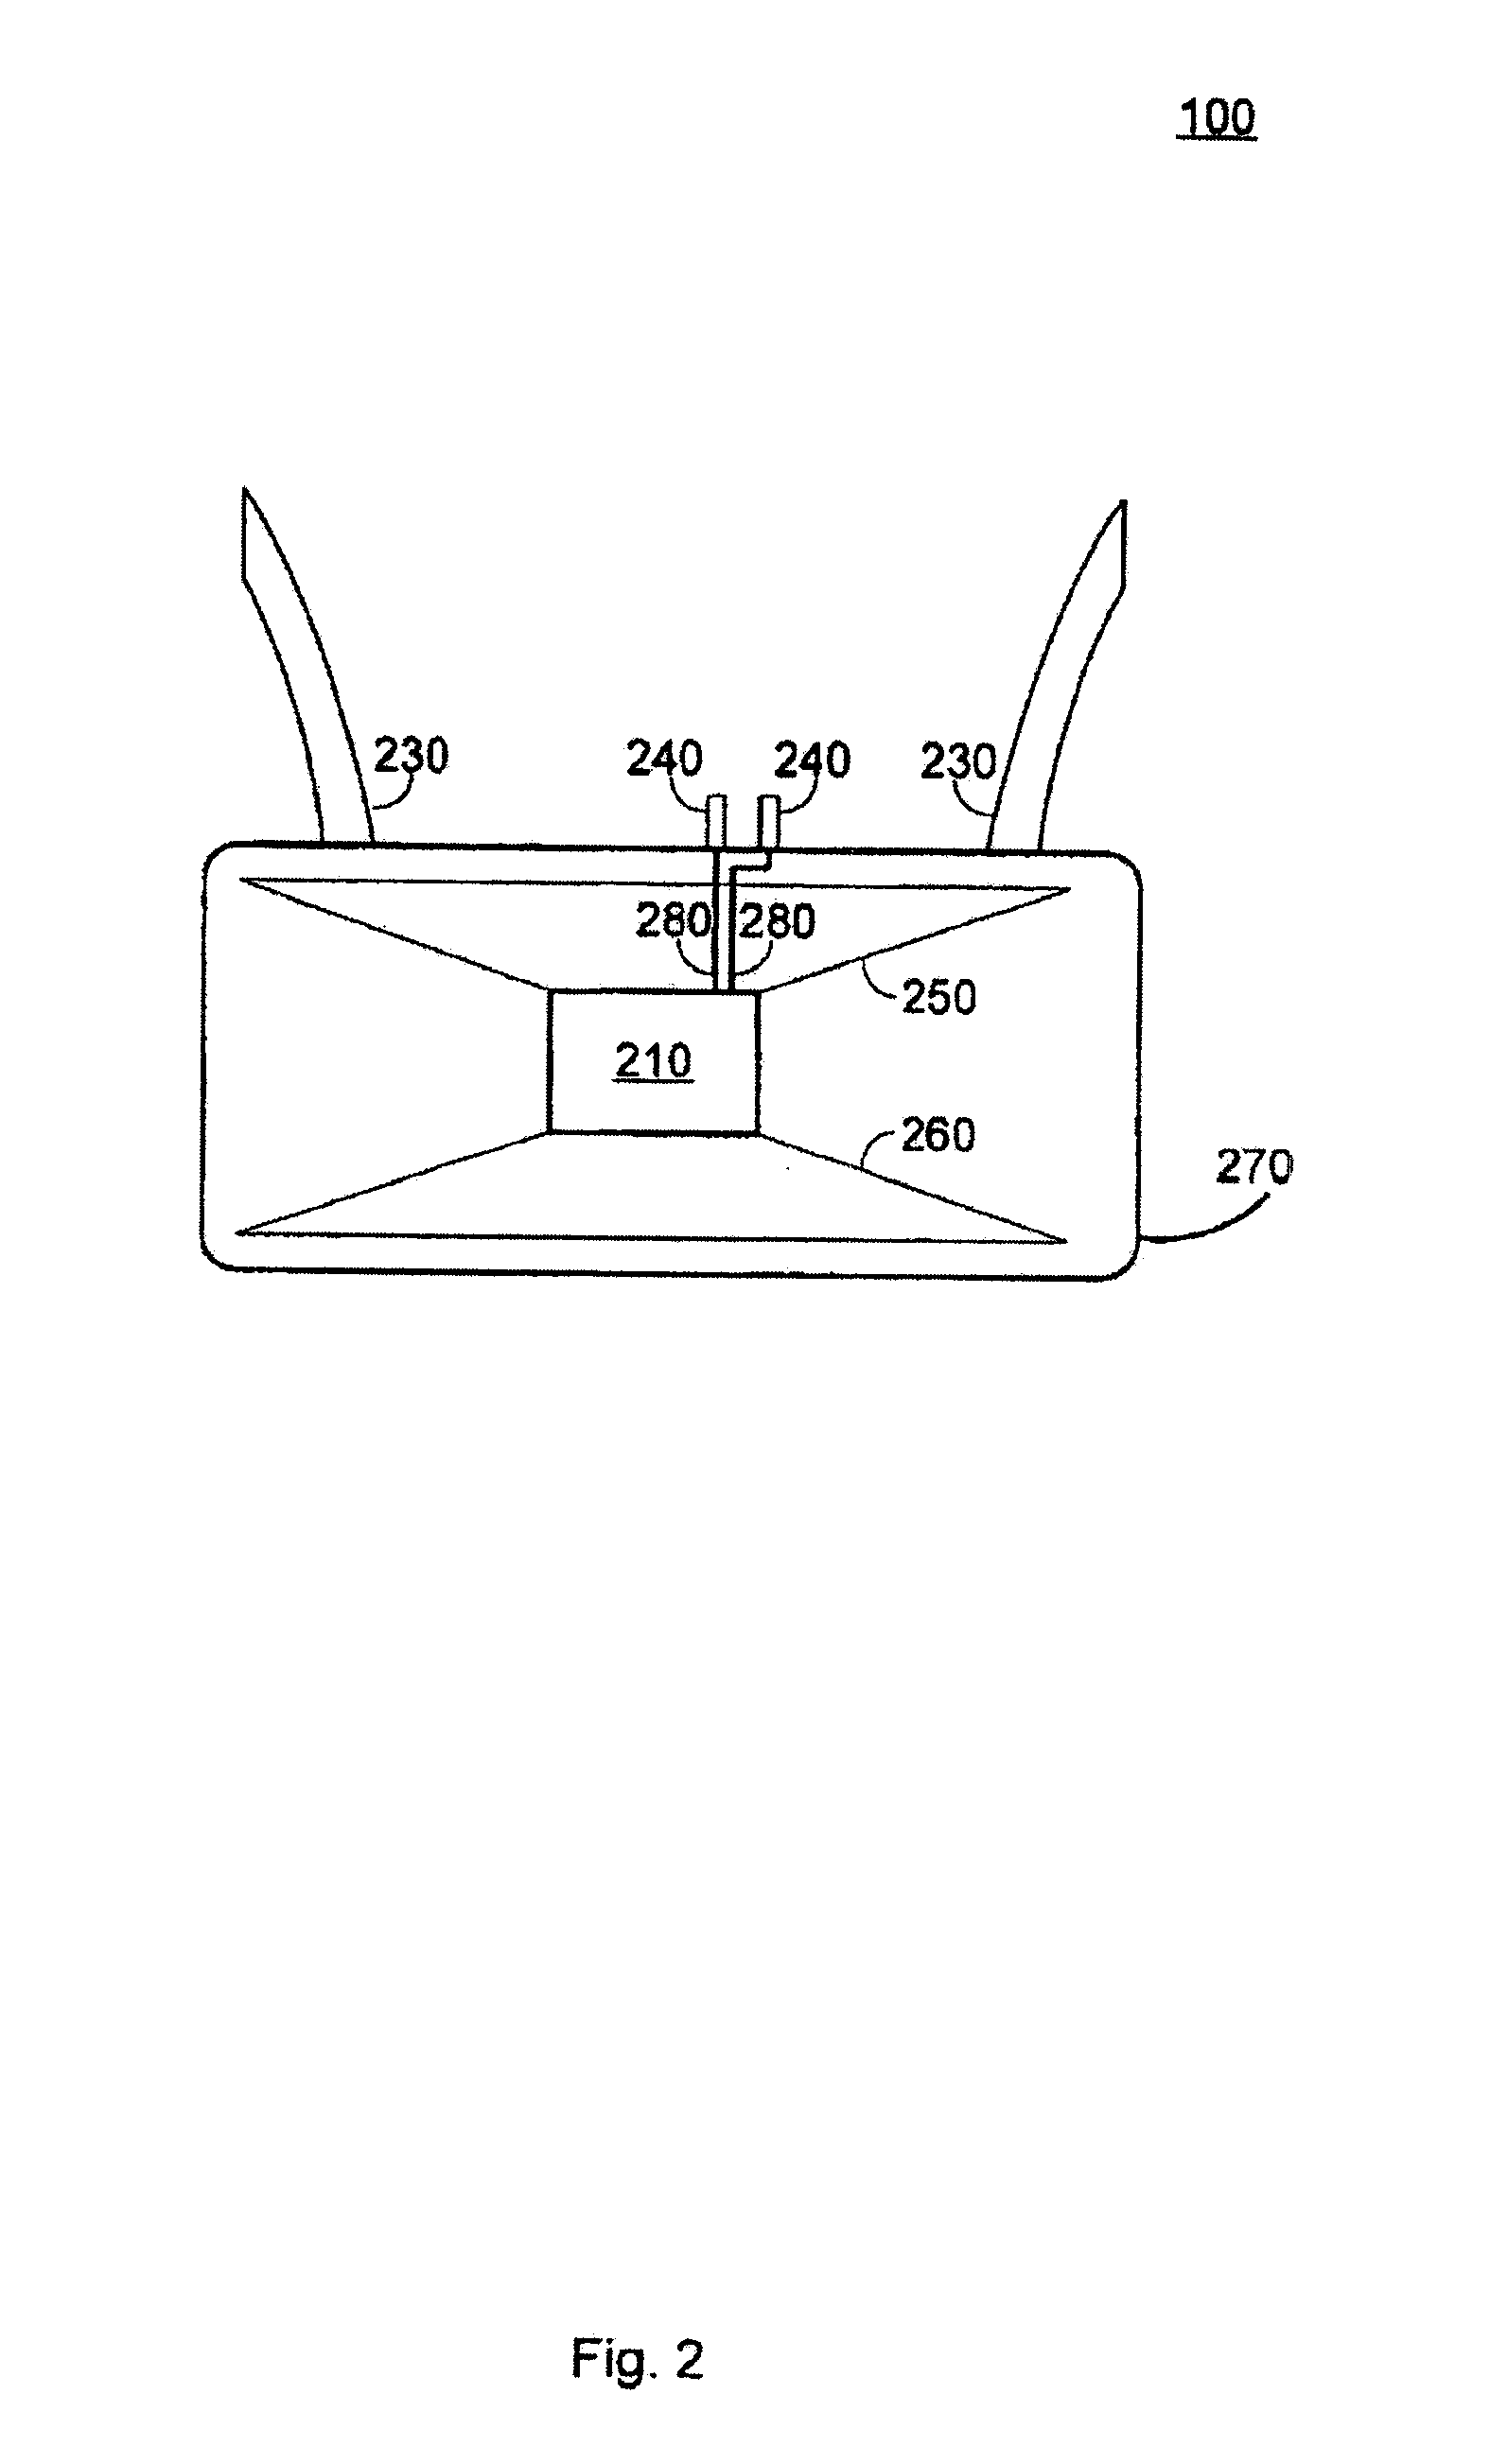 Apparatus and method using near field communications